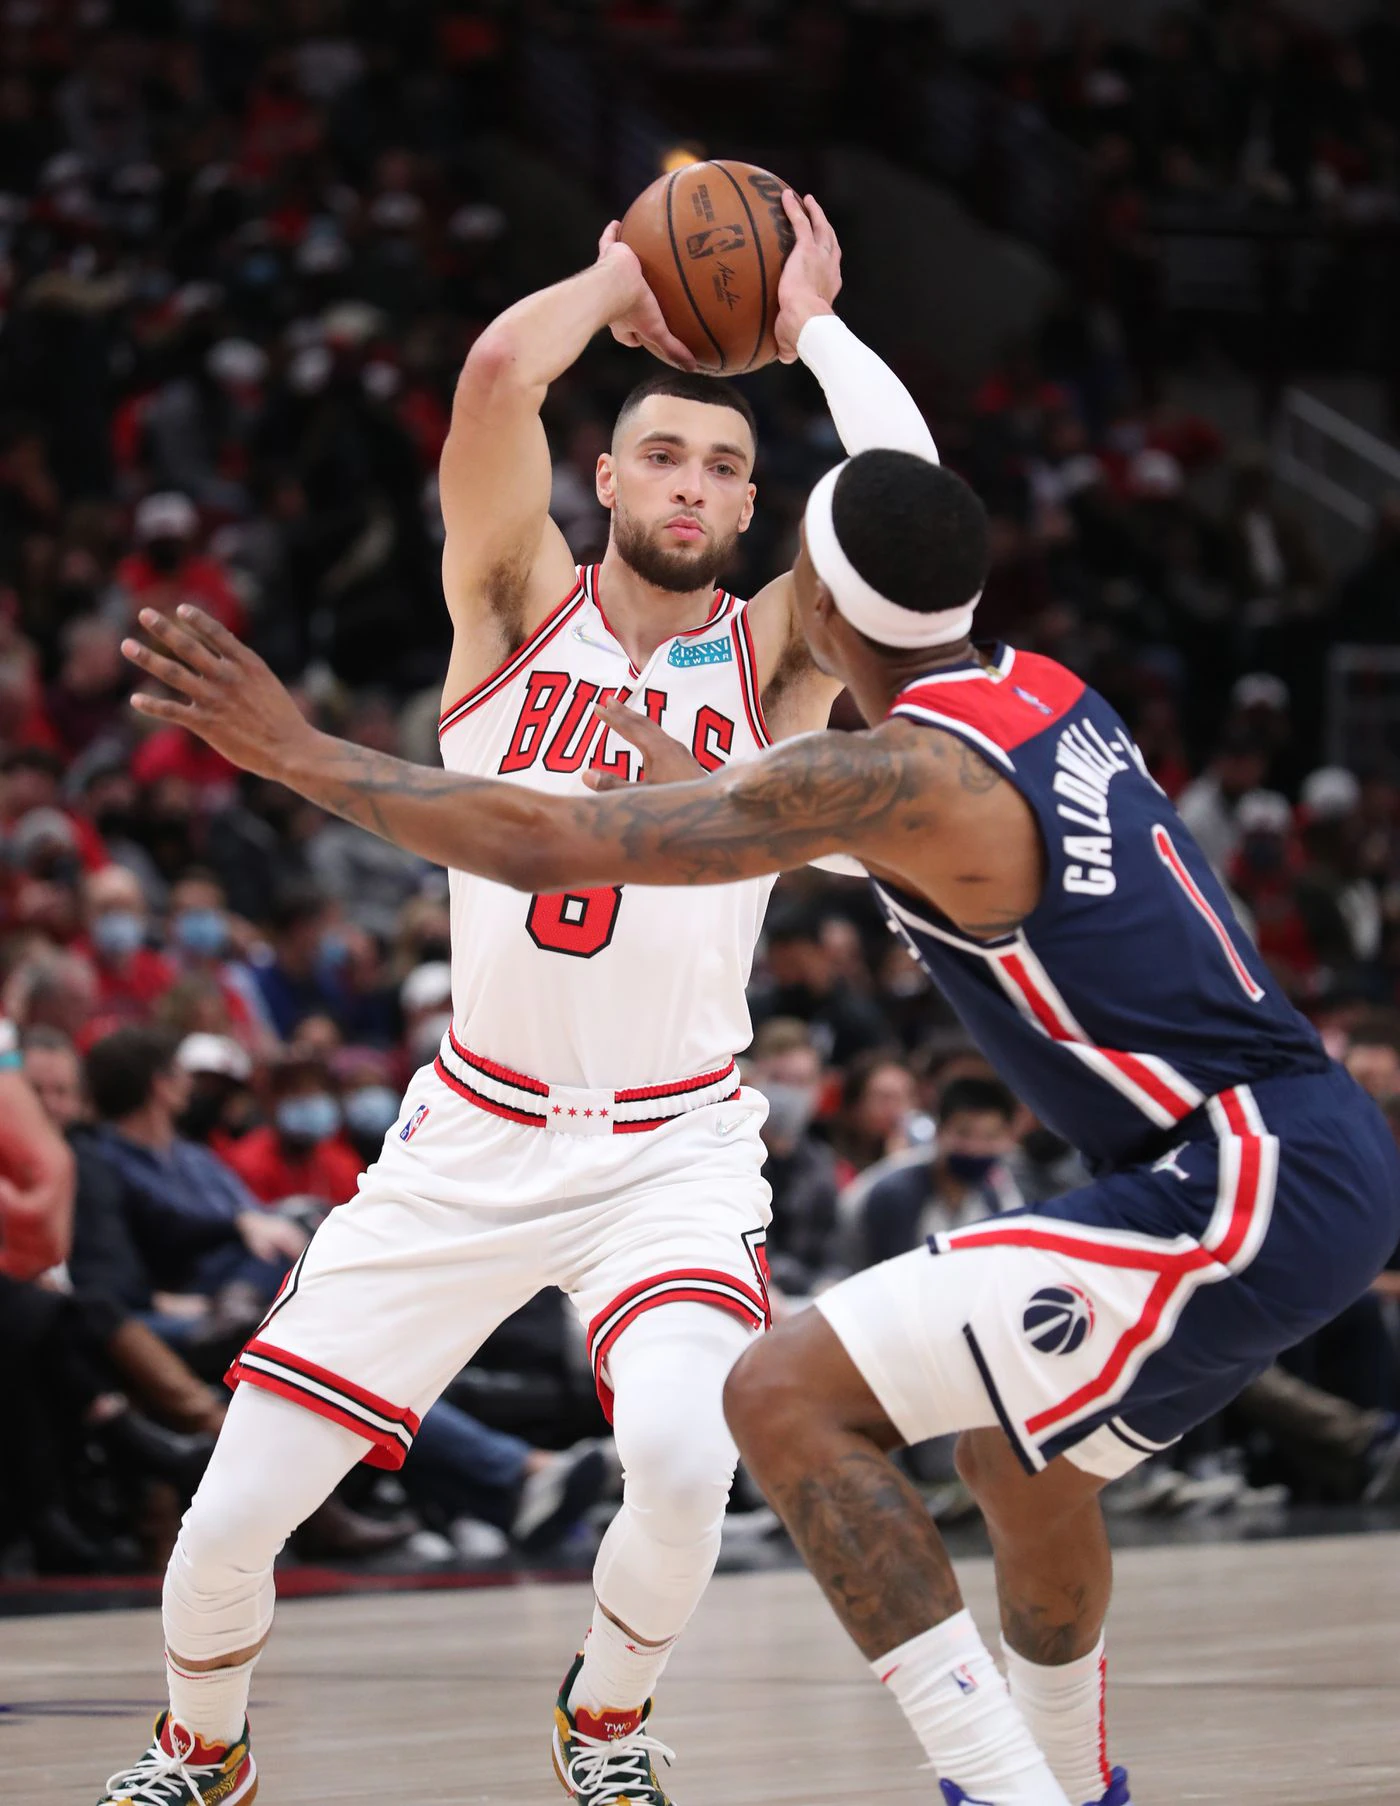 Chicago Bulls guard Zach LaVine (8) looks to pass as Washington Wizards guard Kentavious Caldwell-Pope (1) defends in the first quarter at United Center on Jan. 7, 2022, in Chicago.